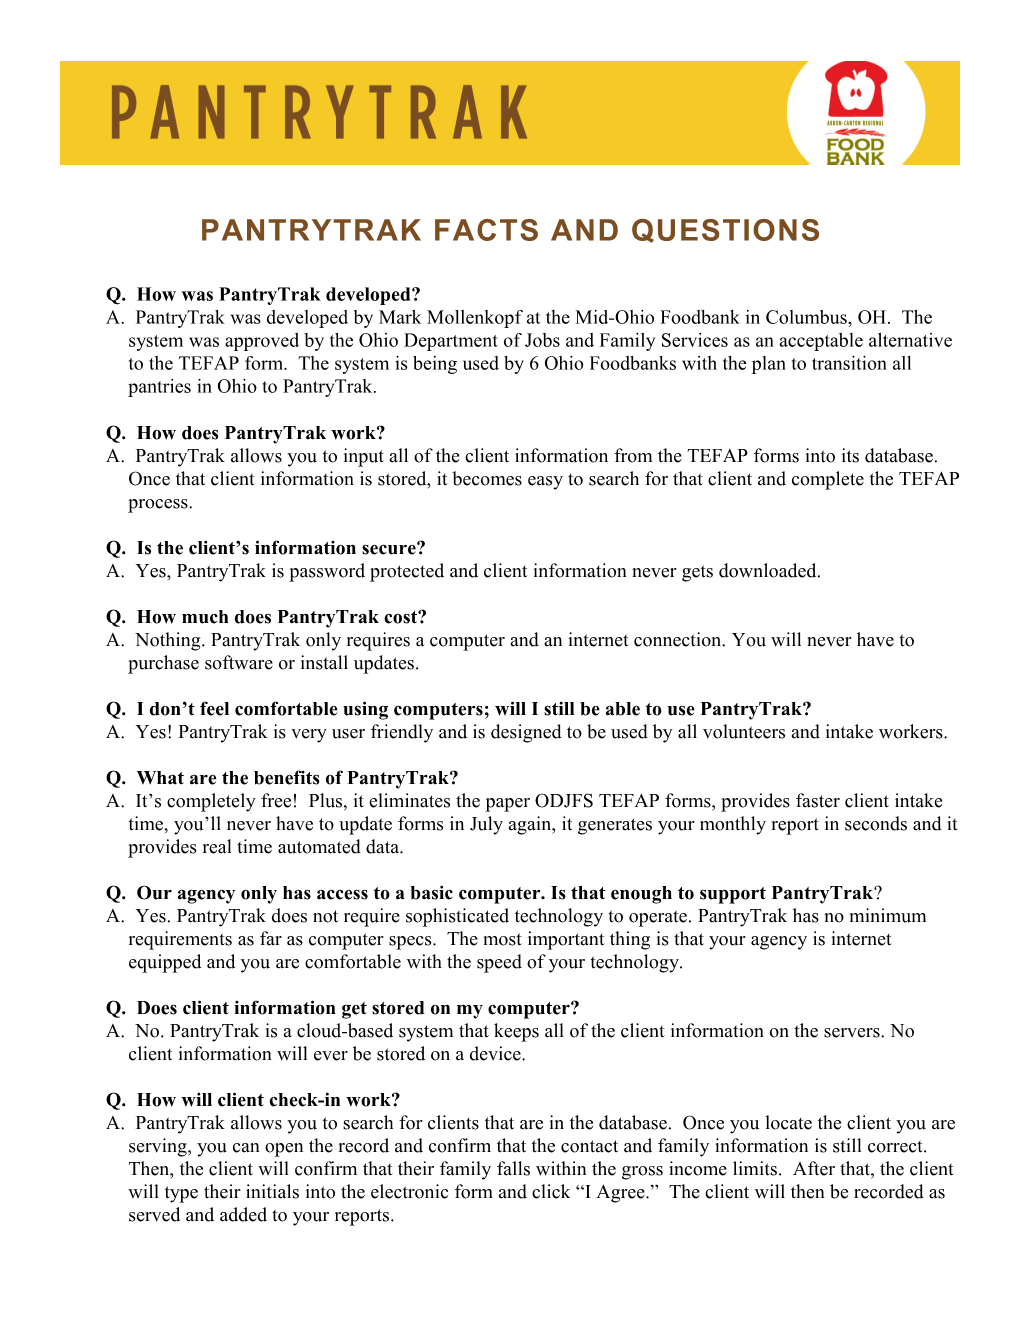 Pantrytrak Facts and Questions